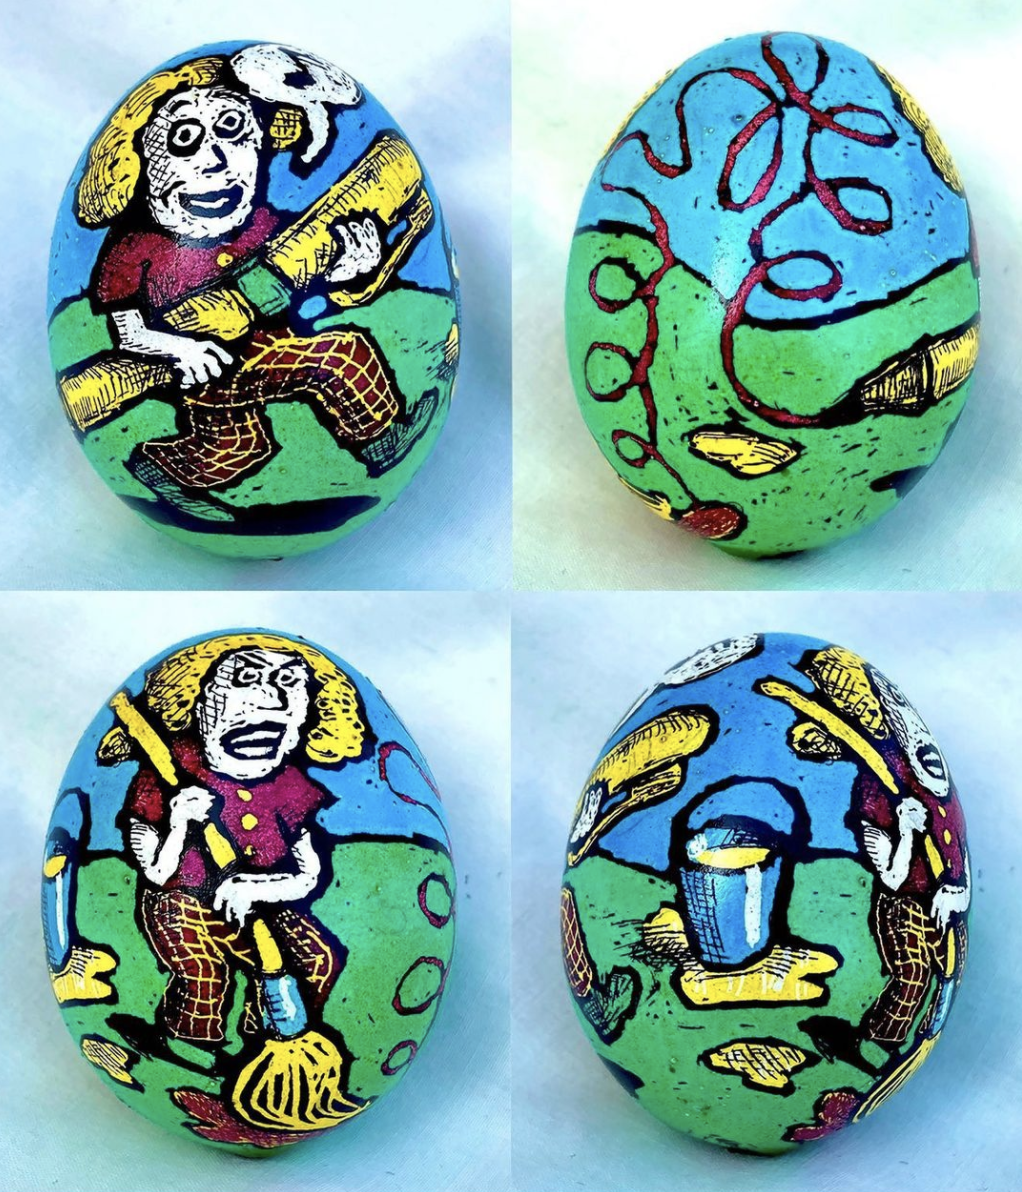 Image of four painted eggs with blue sky green grass and a cartoon-styled blond person 